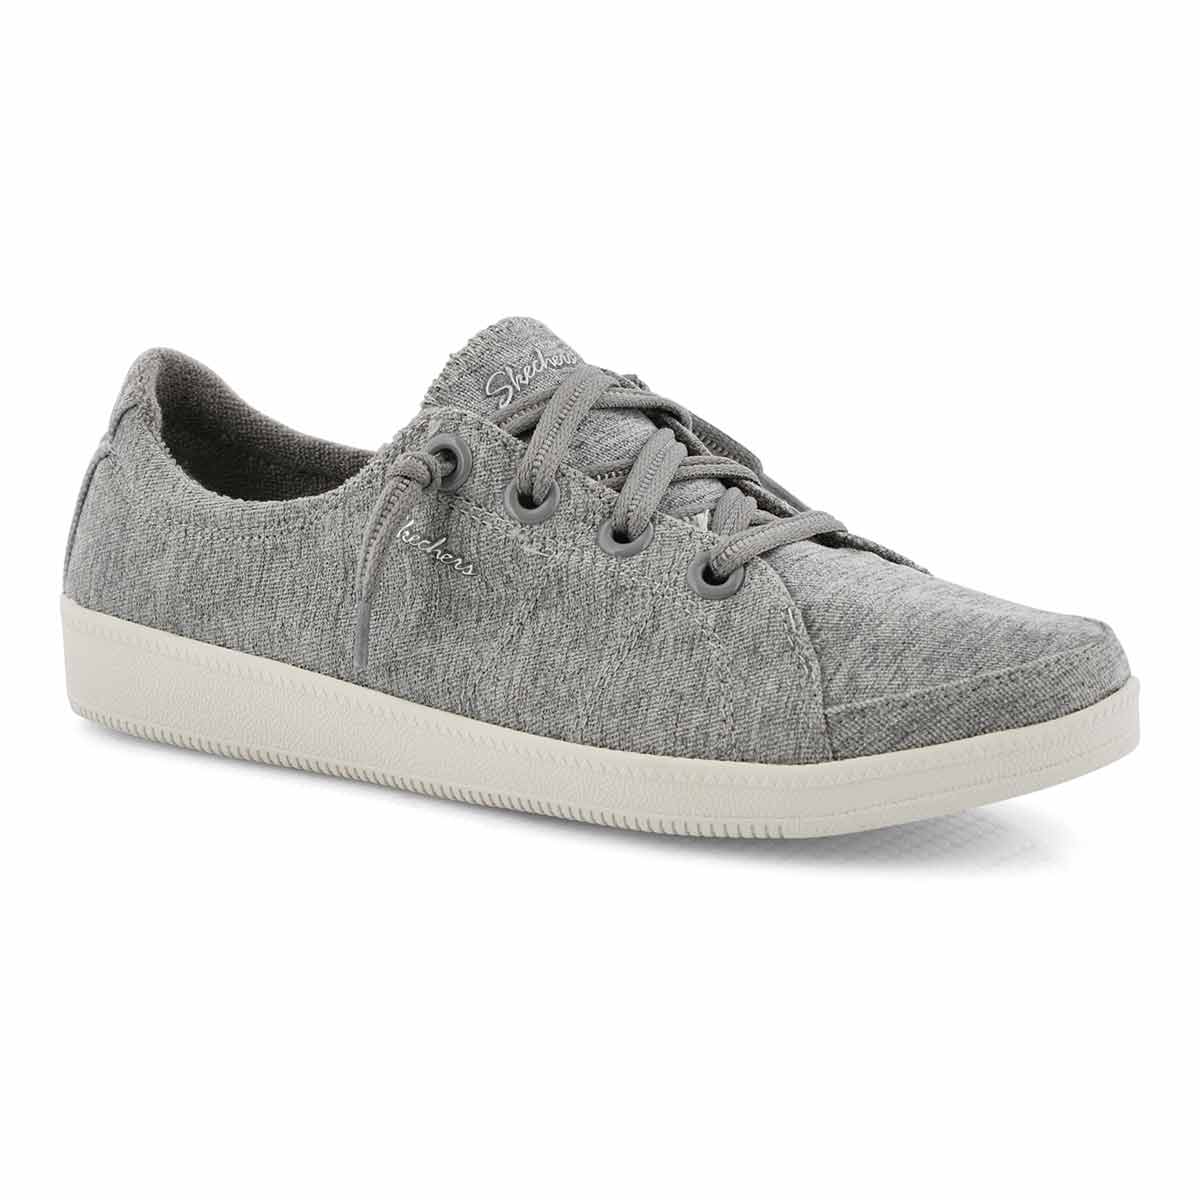 skechers madison ave suede